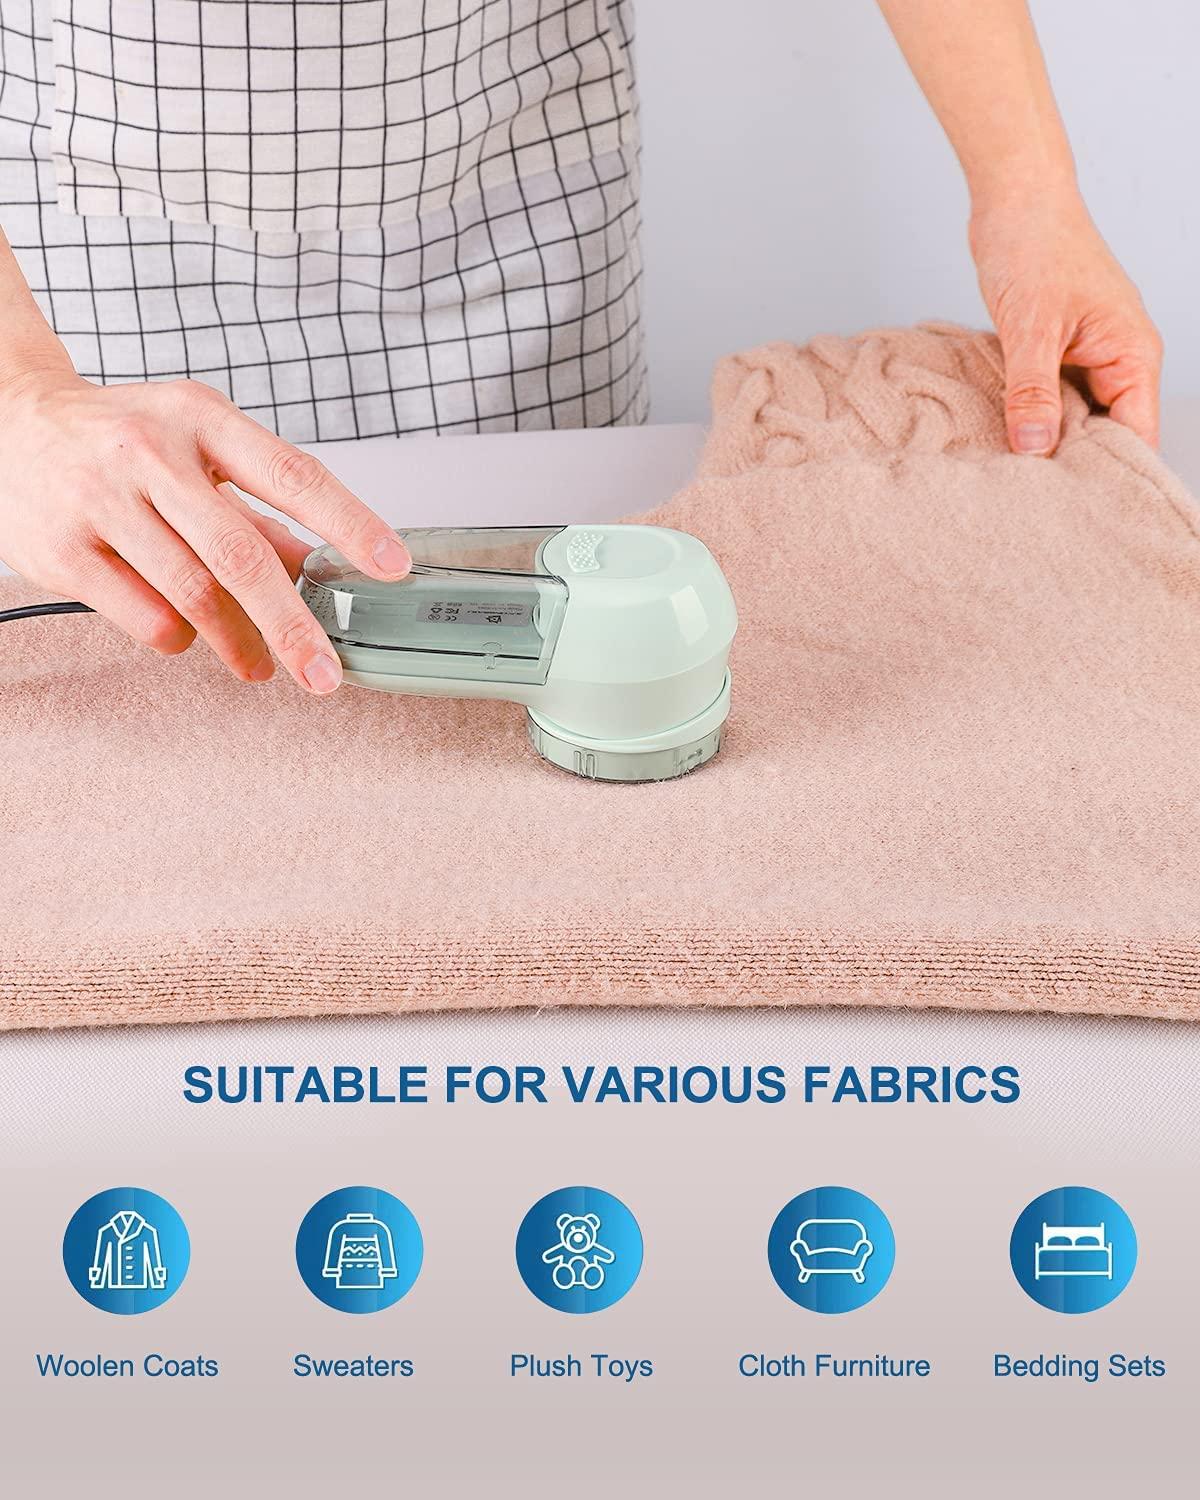 JUEYINGBAILI Fabric Lint Shaver - Fuzz Remover, with 3 Shave Heights ,  Battery Operated, AC120V Electric Sweater Shaver, Light Green - Remove Clothes  Fuzz, Lint Balls, Pills, Bobbles.